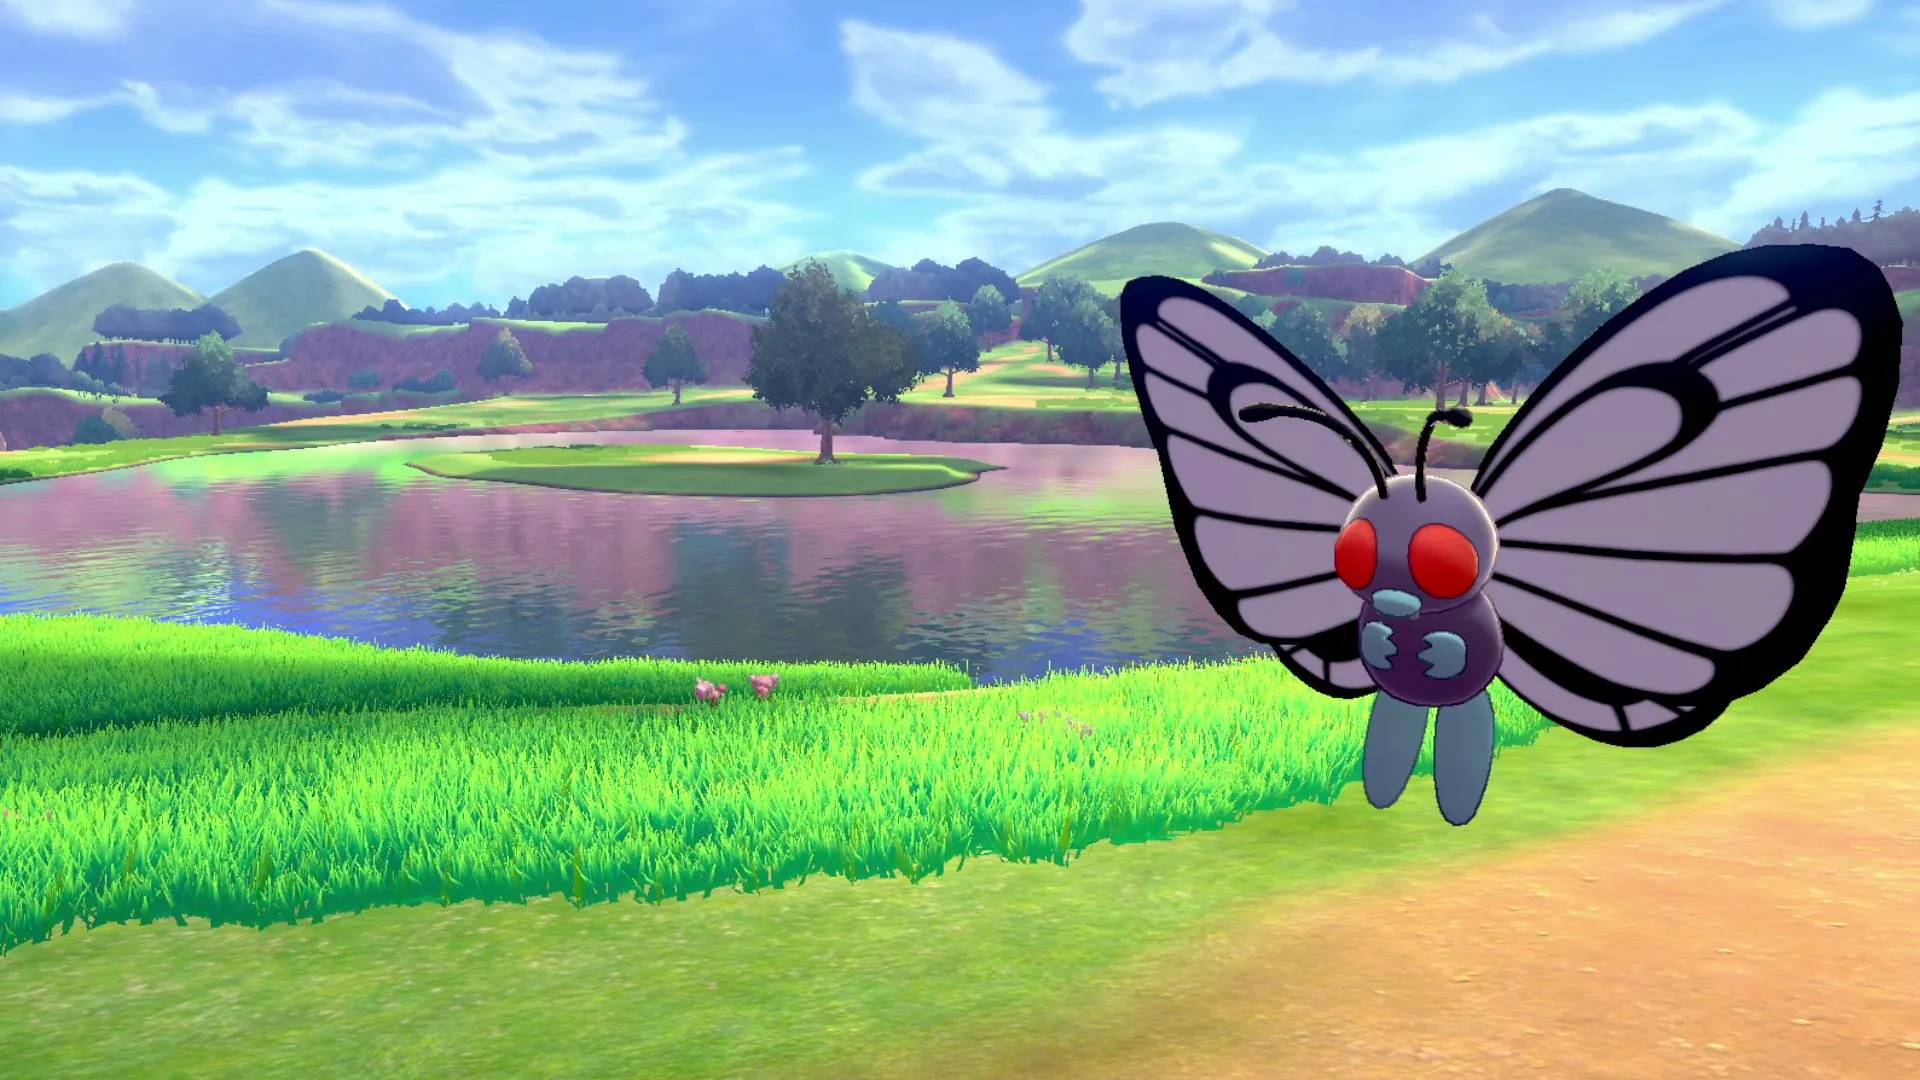 How to check Individual Values in Pokémon Sword and Shield - Dot Esports